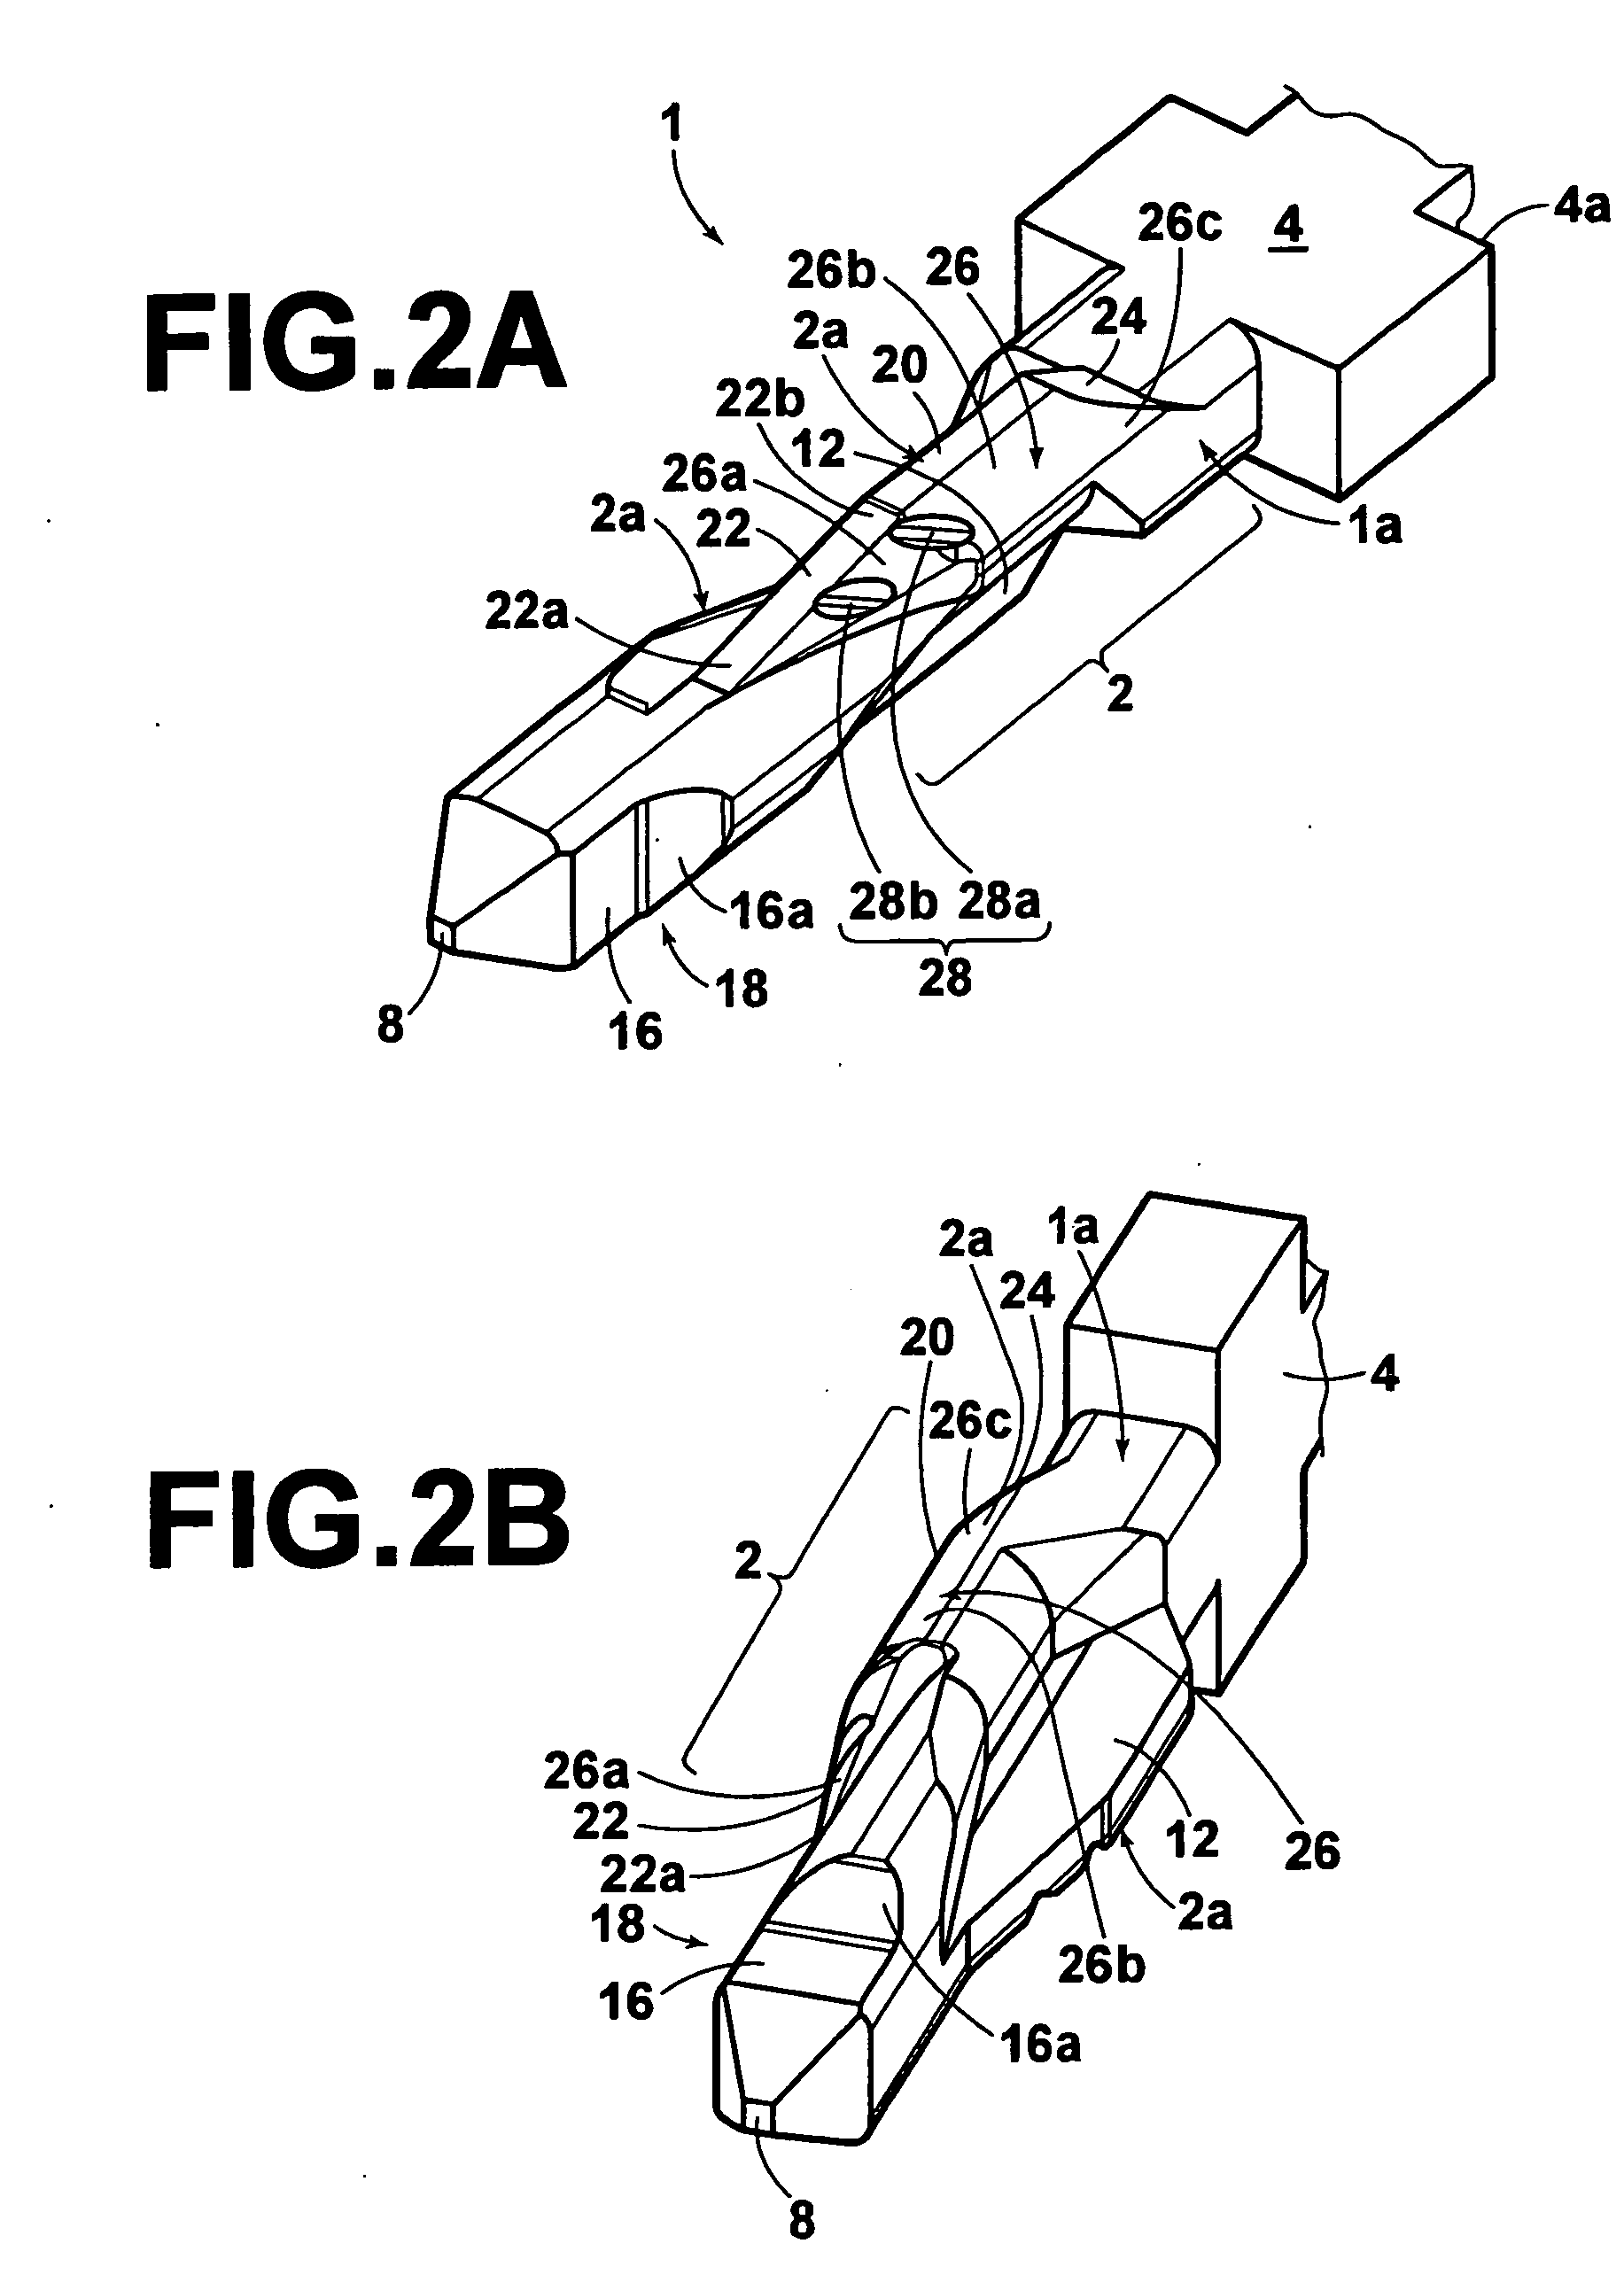 Compliant pin and electrical connector utilizing compliant pin